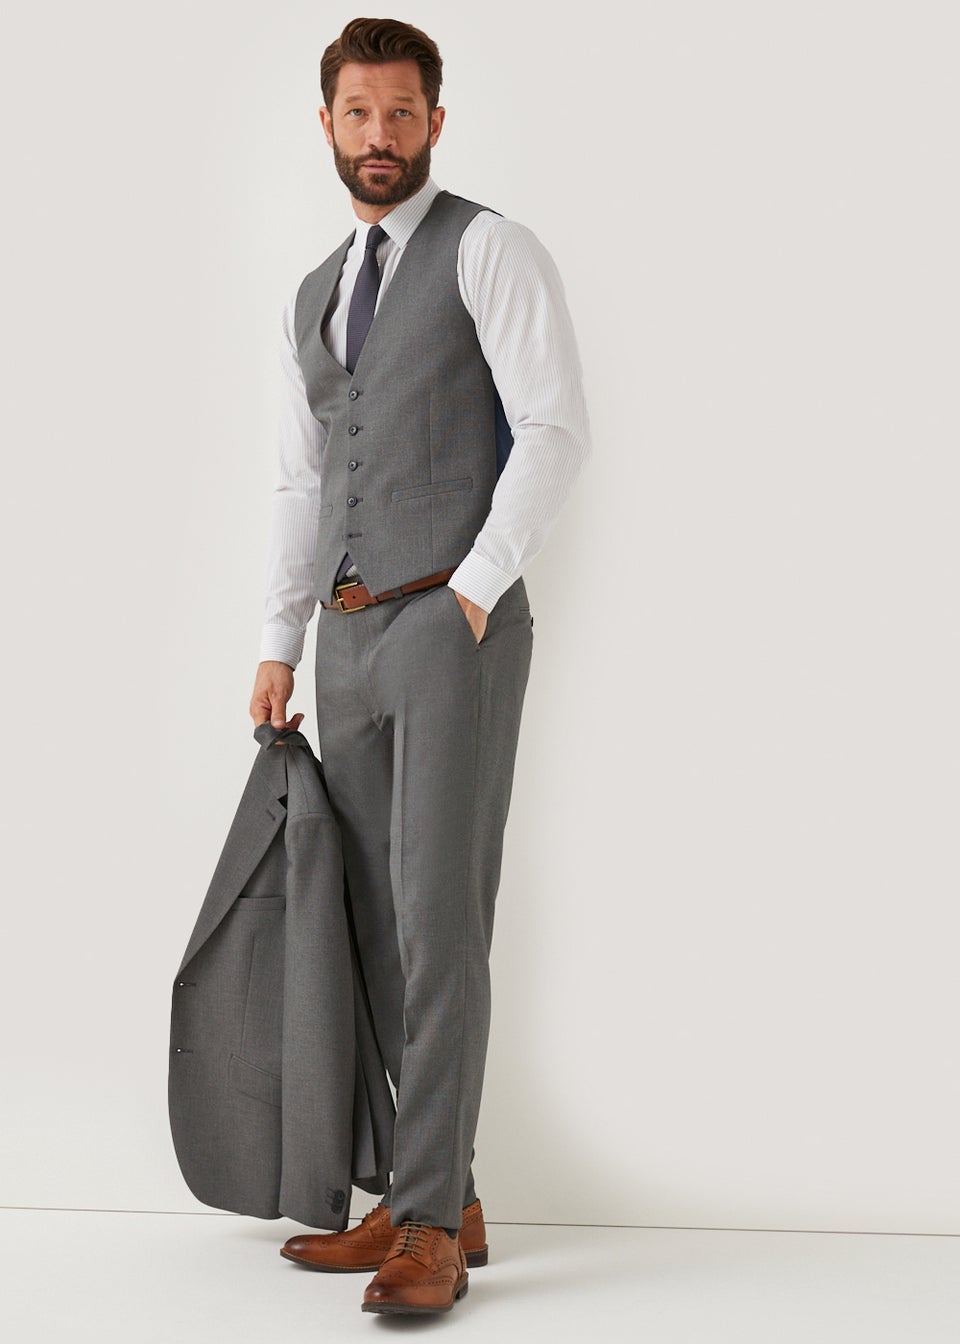 Taylor & Wright Austen Charcoal Tailored Fit Suit Waistcoat